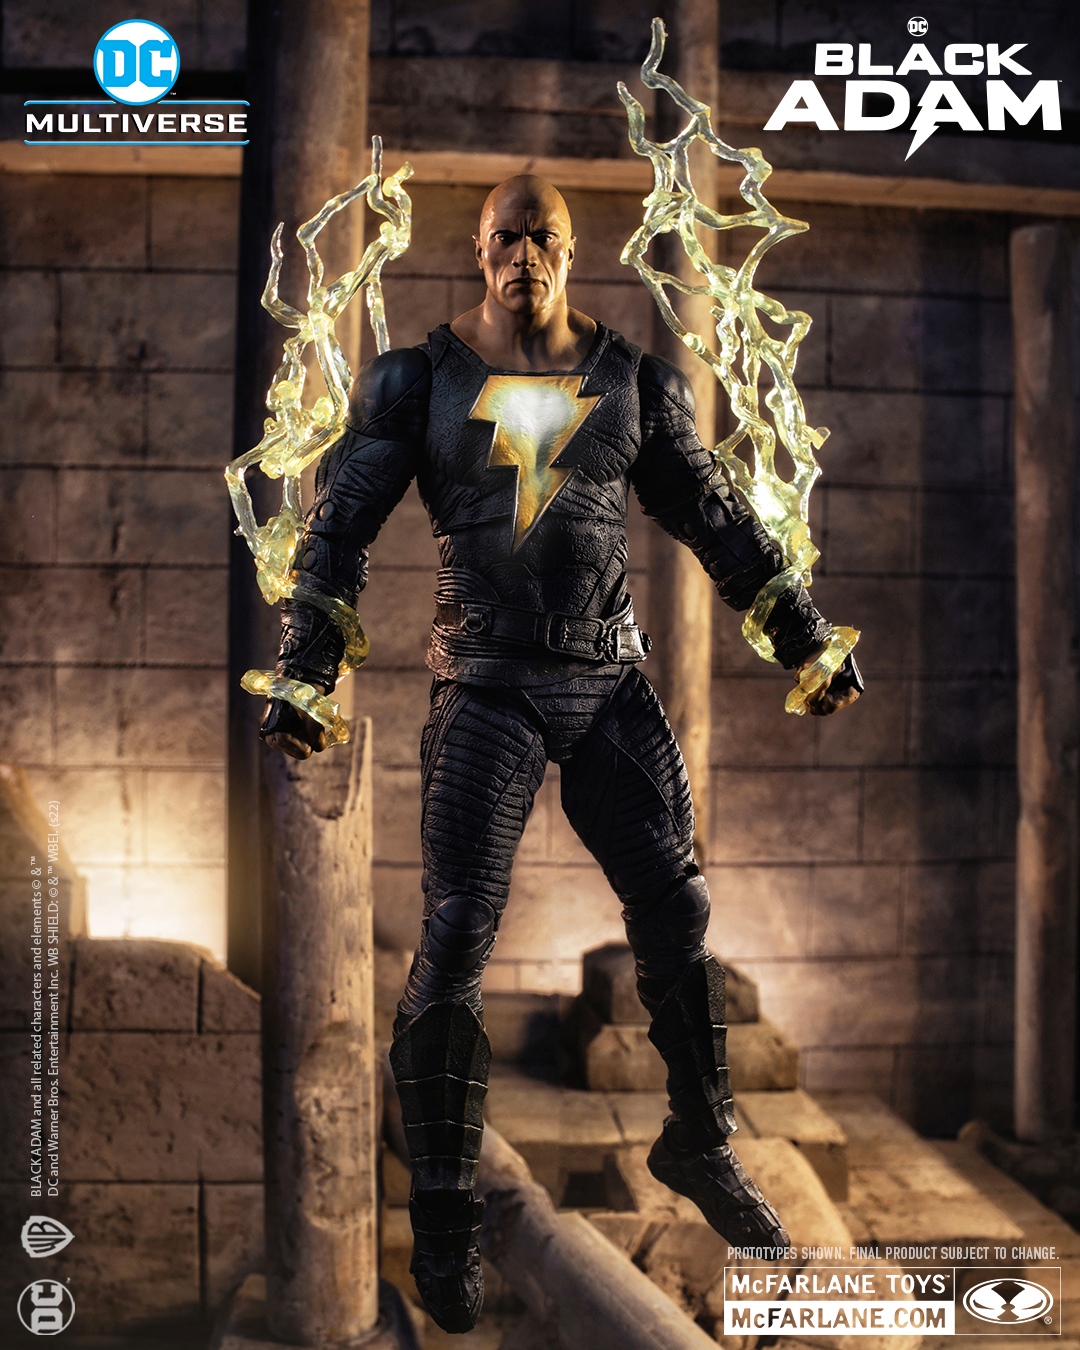 BLACK ADAM Is About To Change Everything 